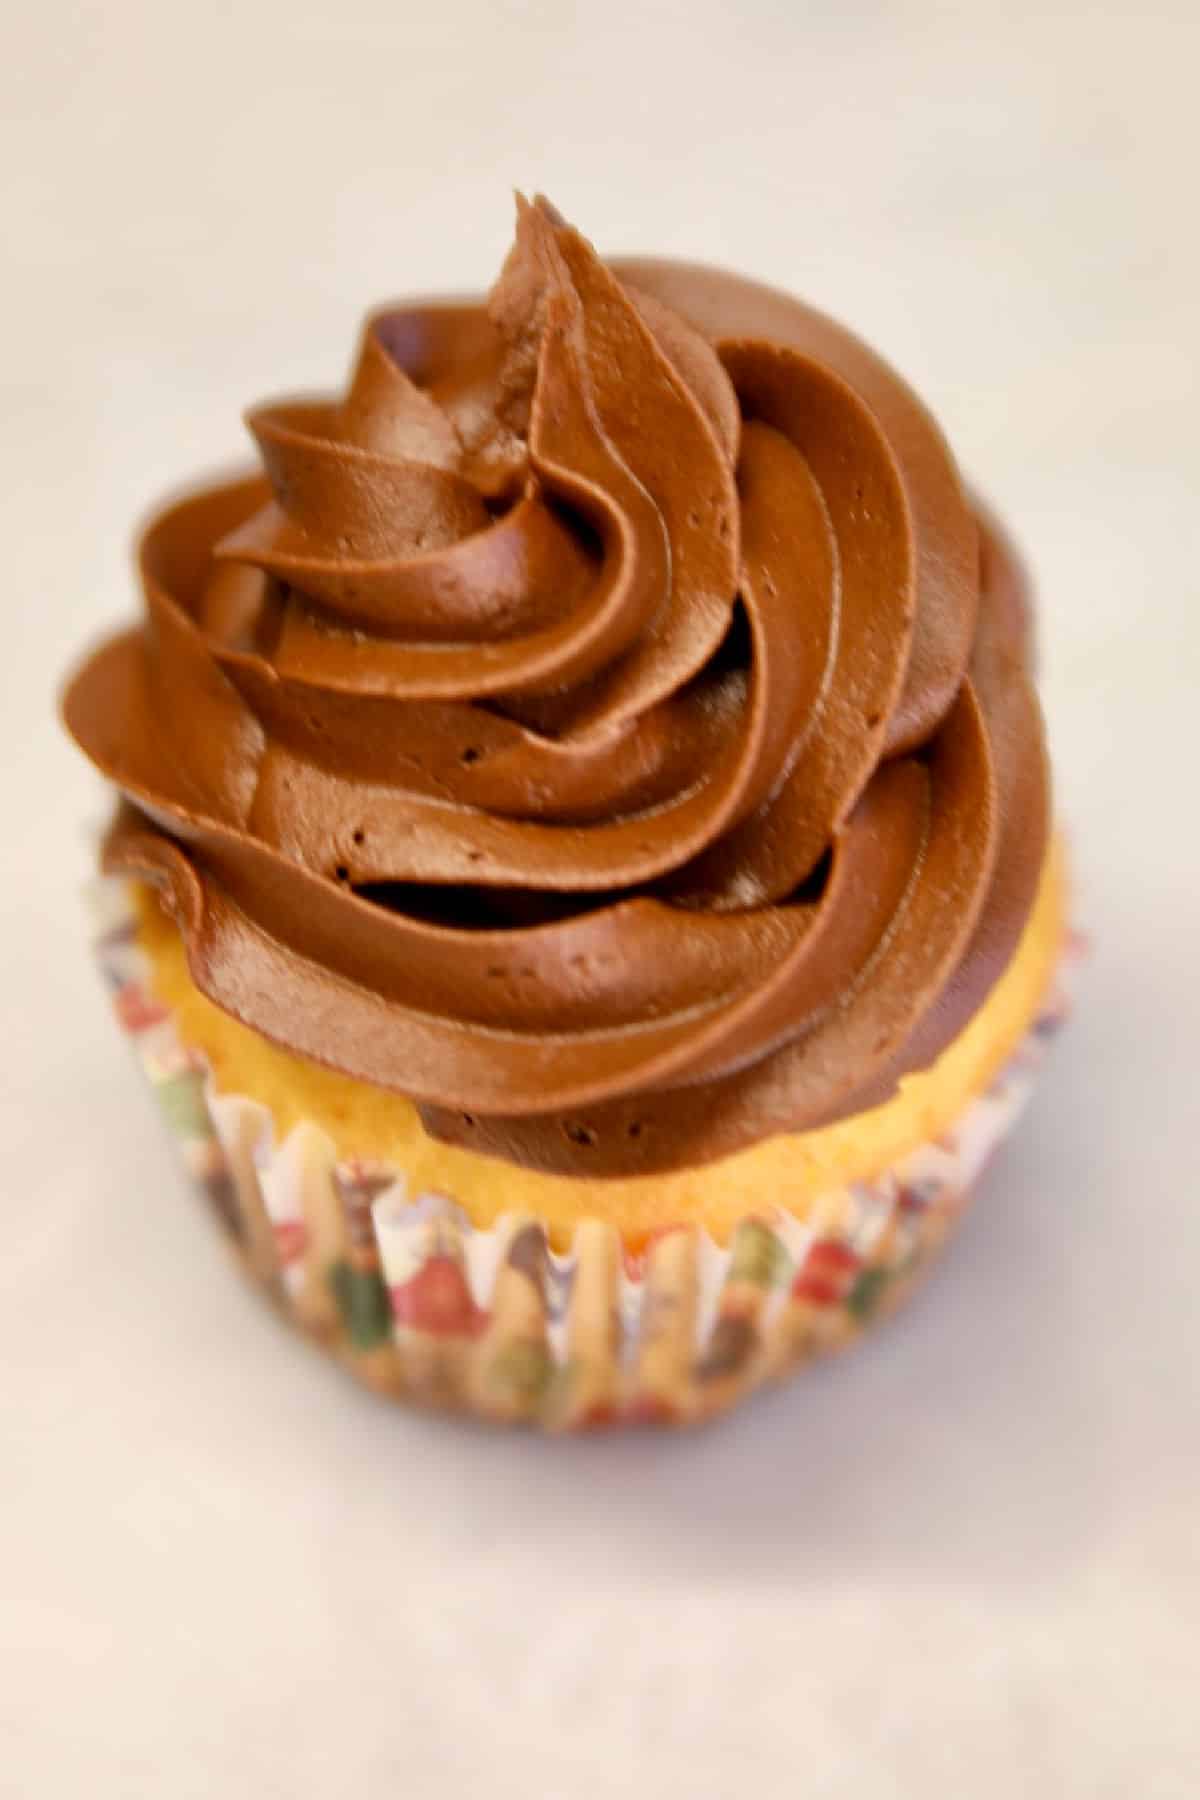 Chocolate frosted cupcake.